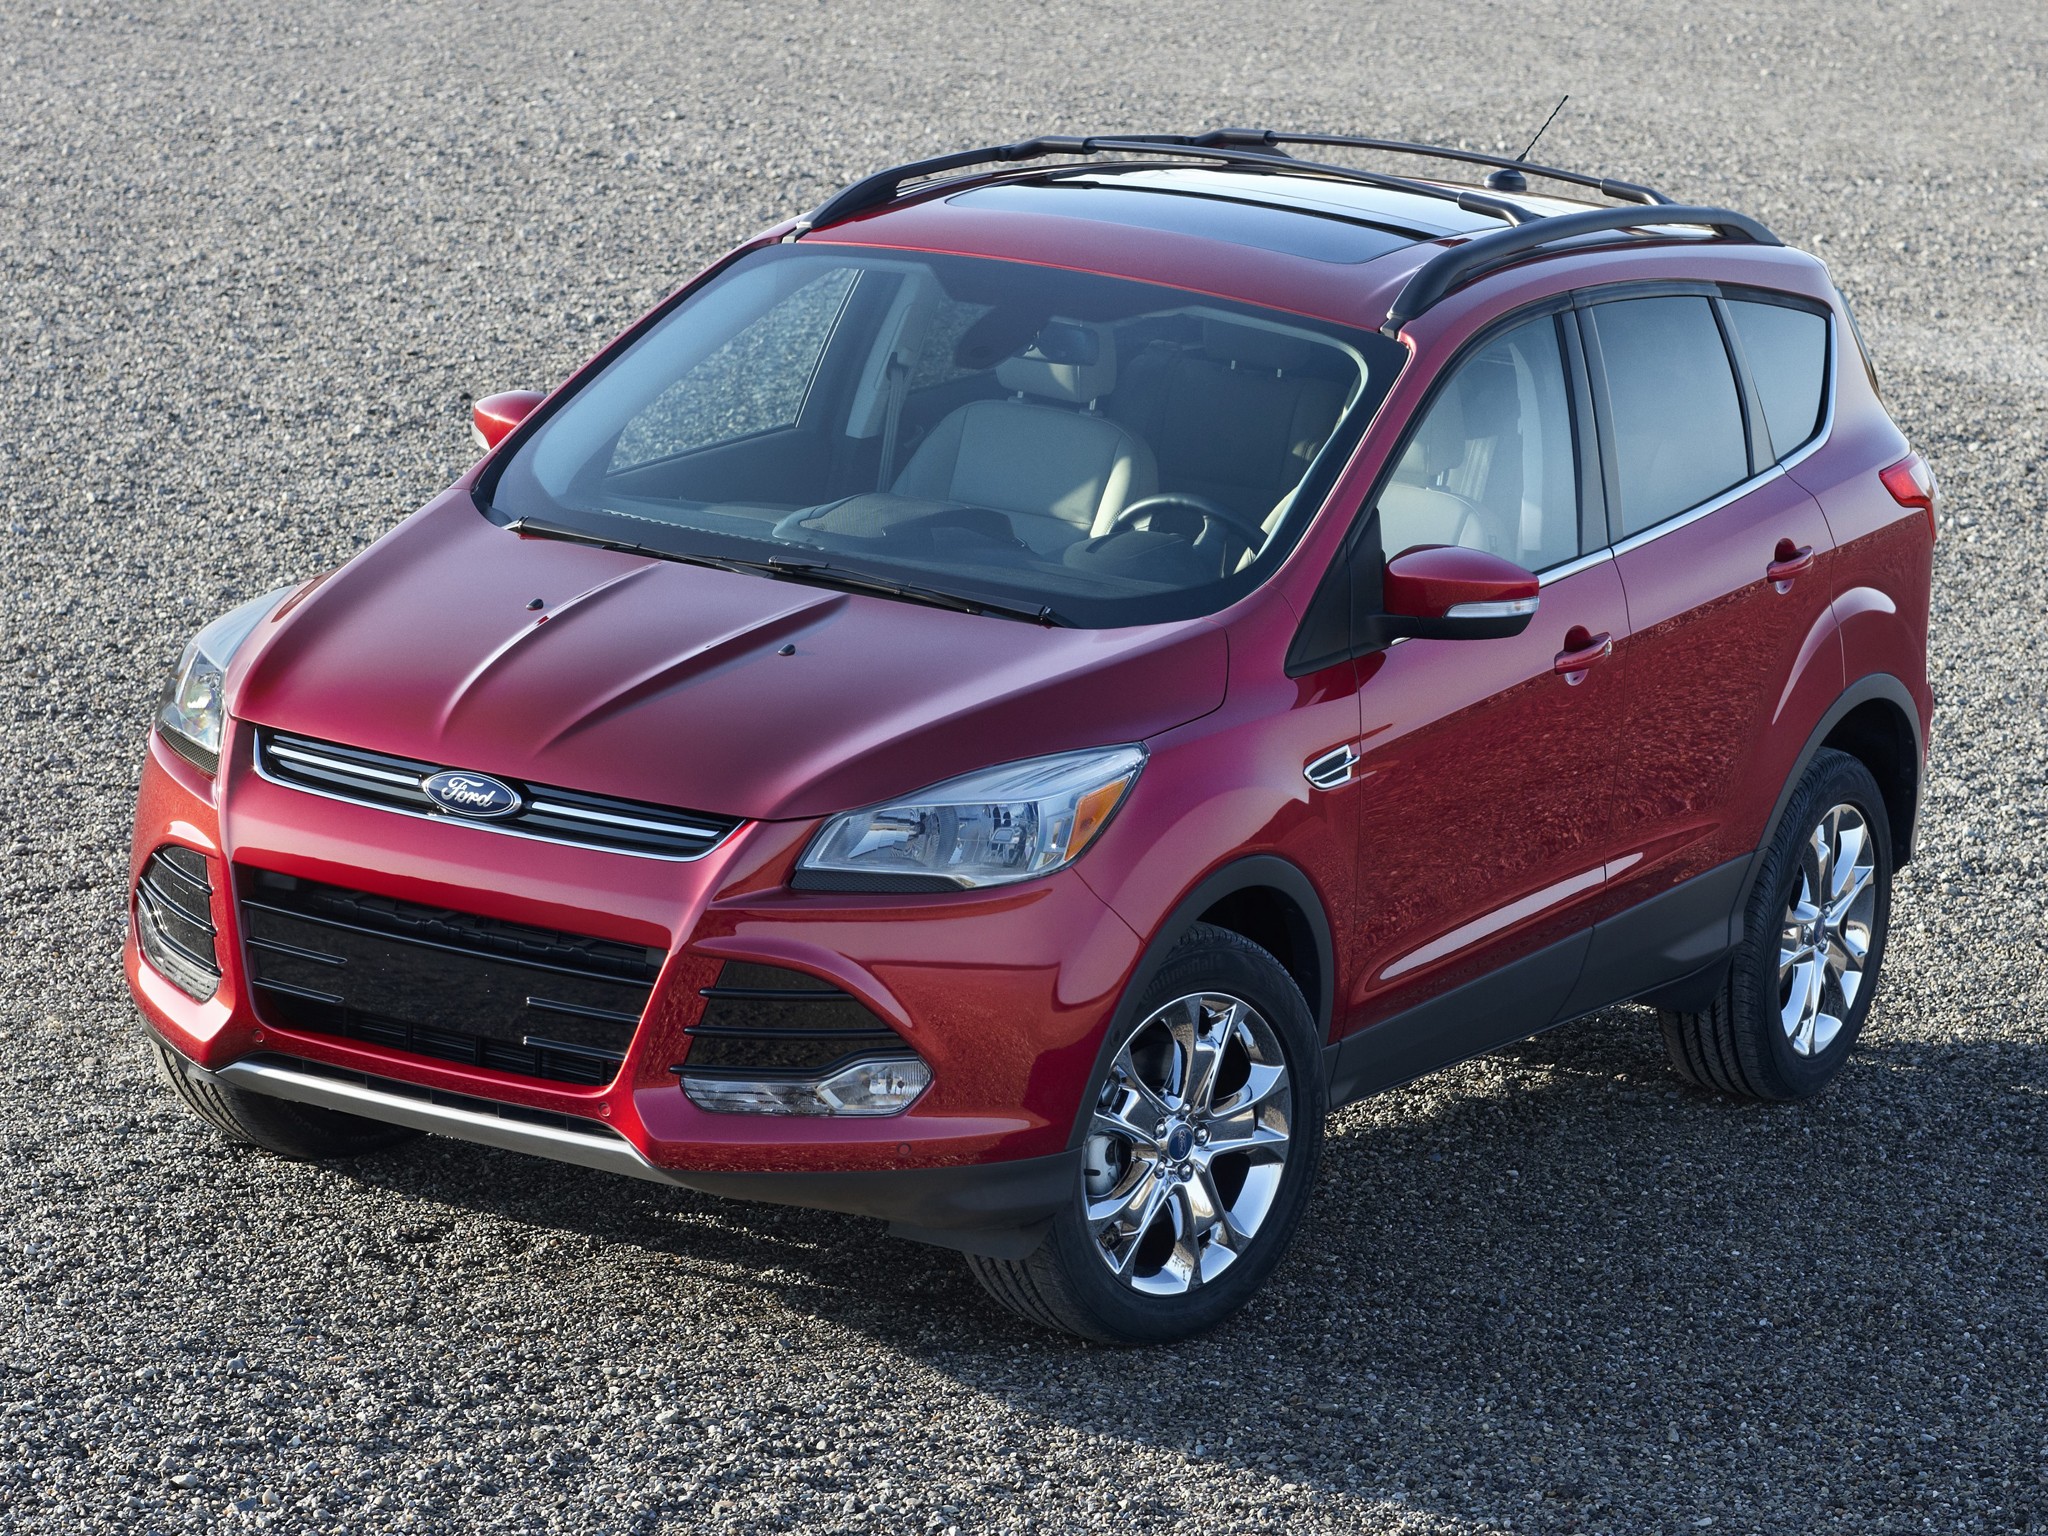 2012 Ford Escape Review Problems Reliability Value Life Expectancy MPG